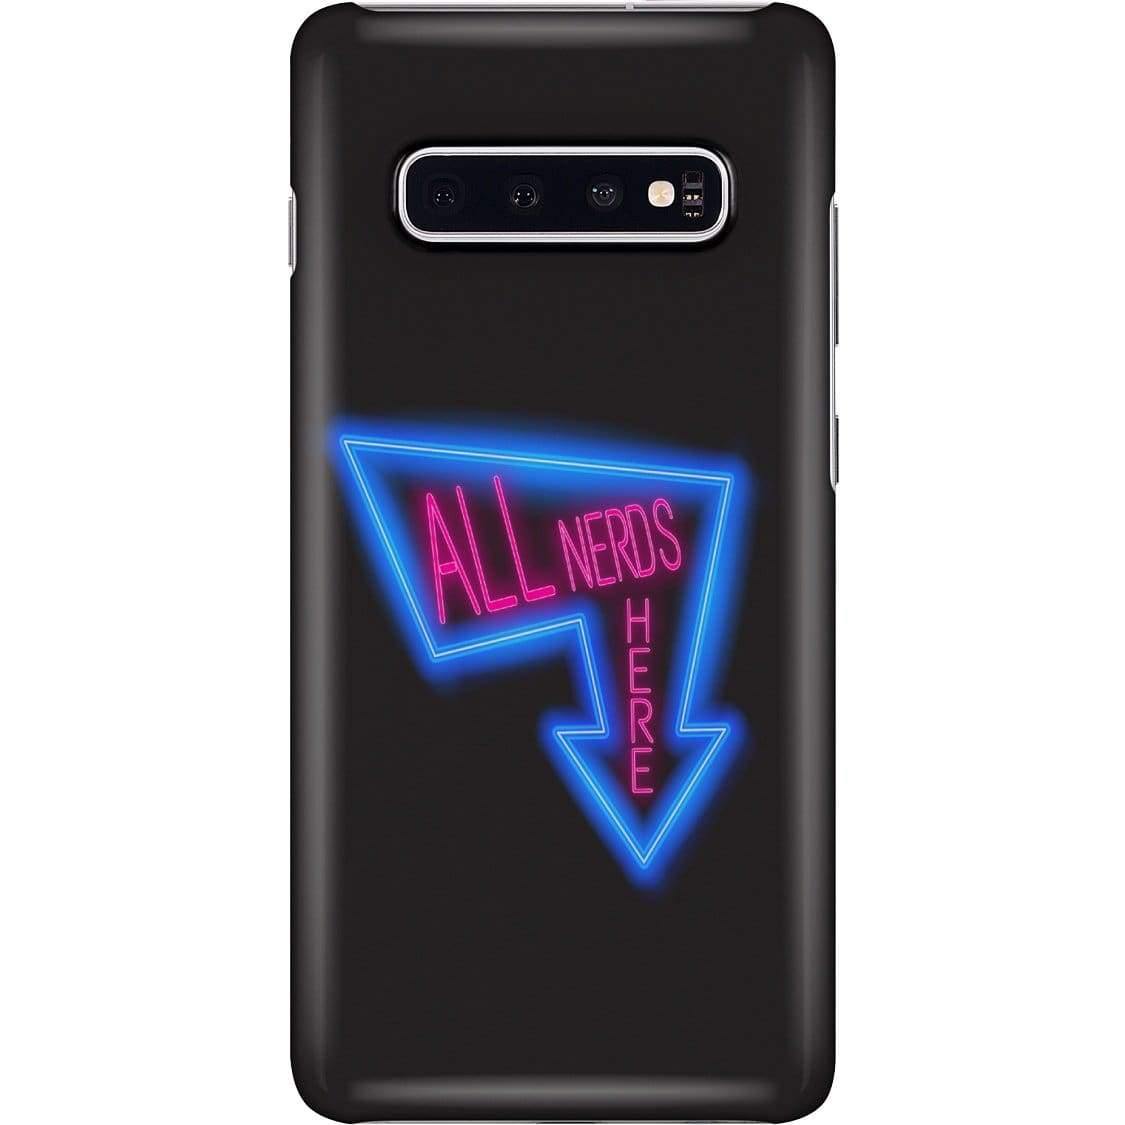 All Nerds Here Neon Logo Phone Case - Snap * iPhone * Samsung * - Samsung Galaxy S10 Plus Case / Gloss / All Nerds Here